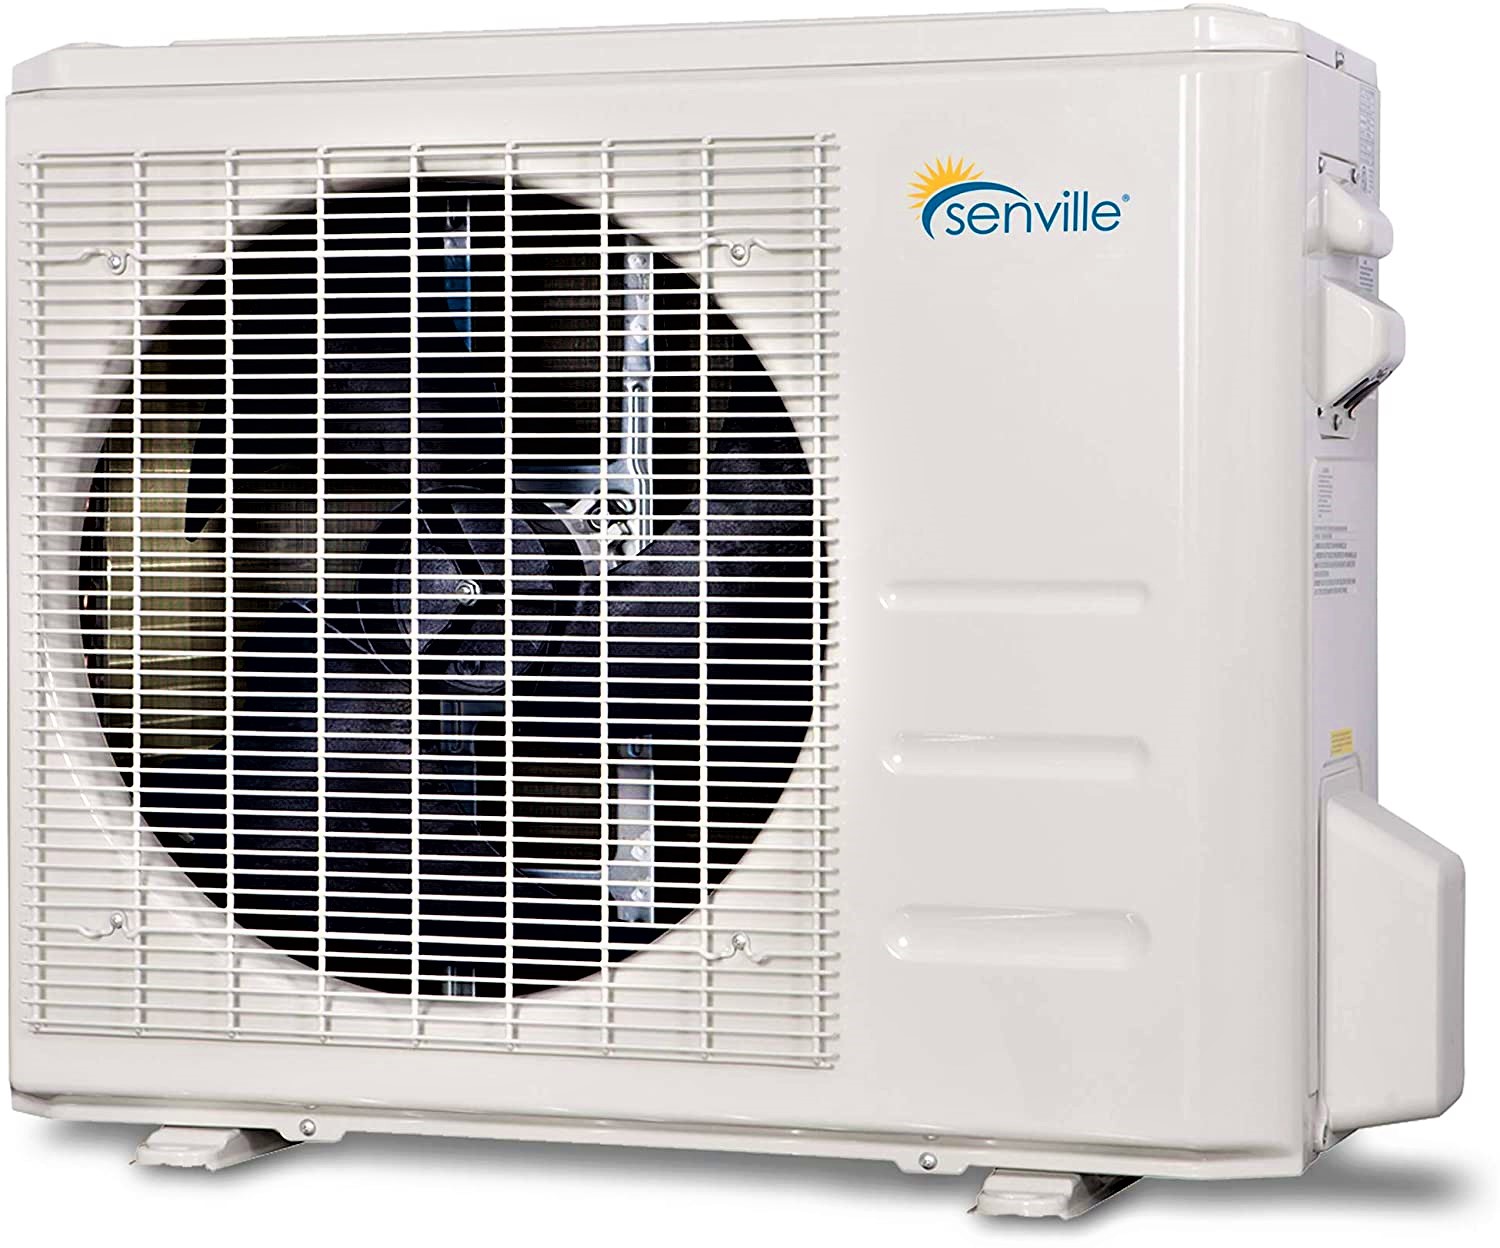 71b4mabMcTL. AC SL1500 10 BEST AIR CONDITIONERS FOR YOUR GARAGE 2021 REVIEW